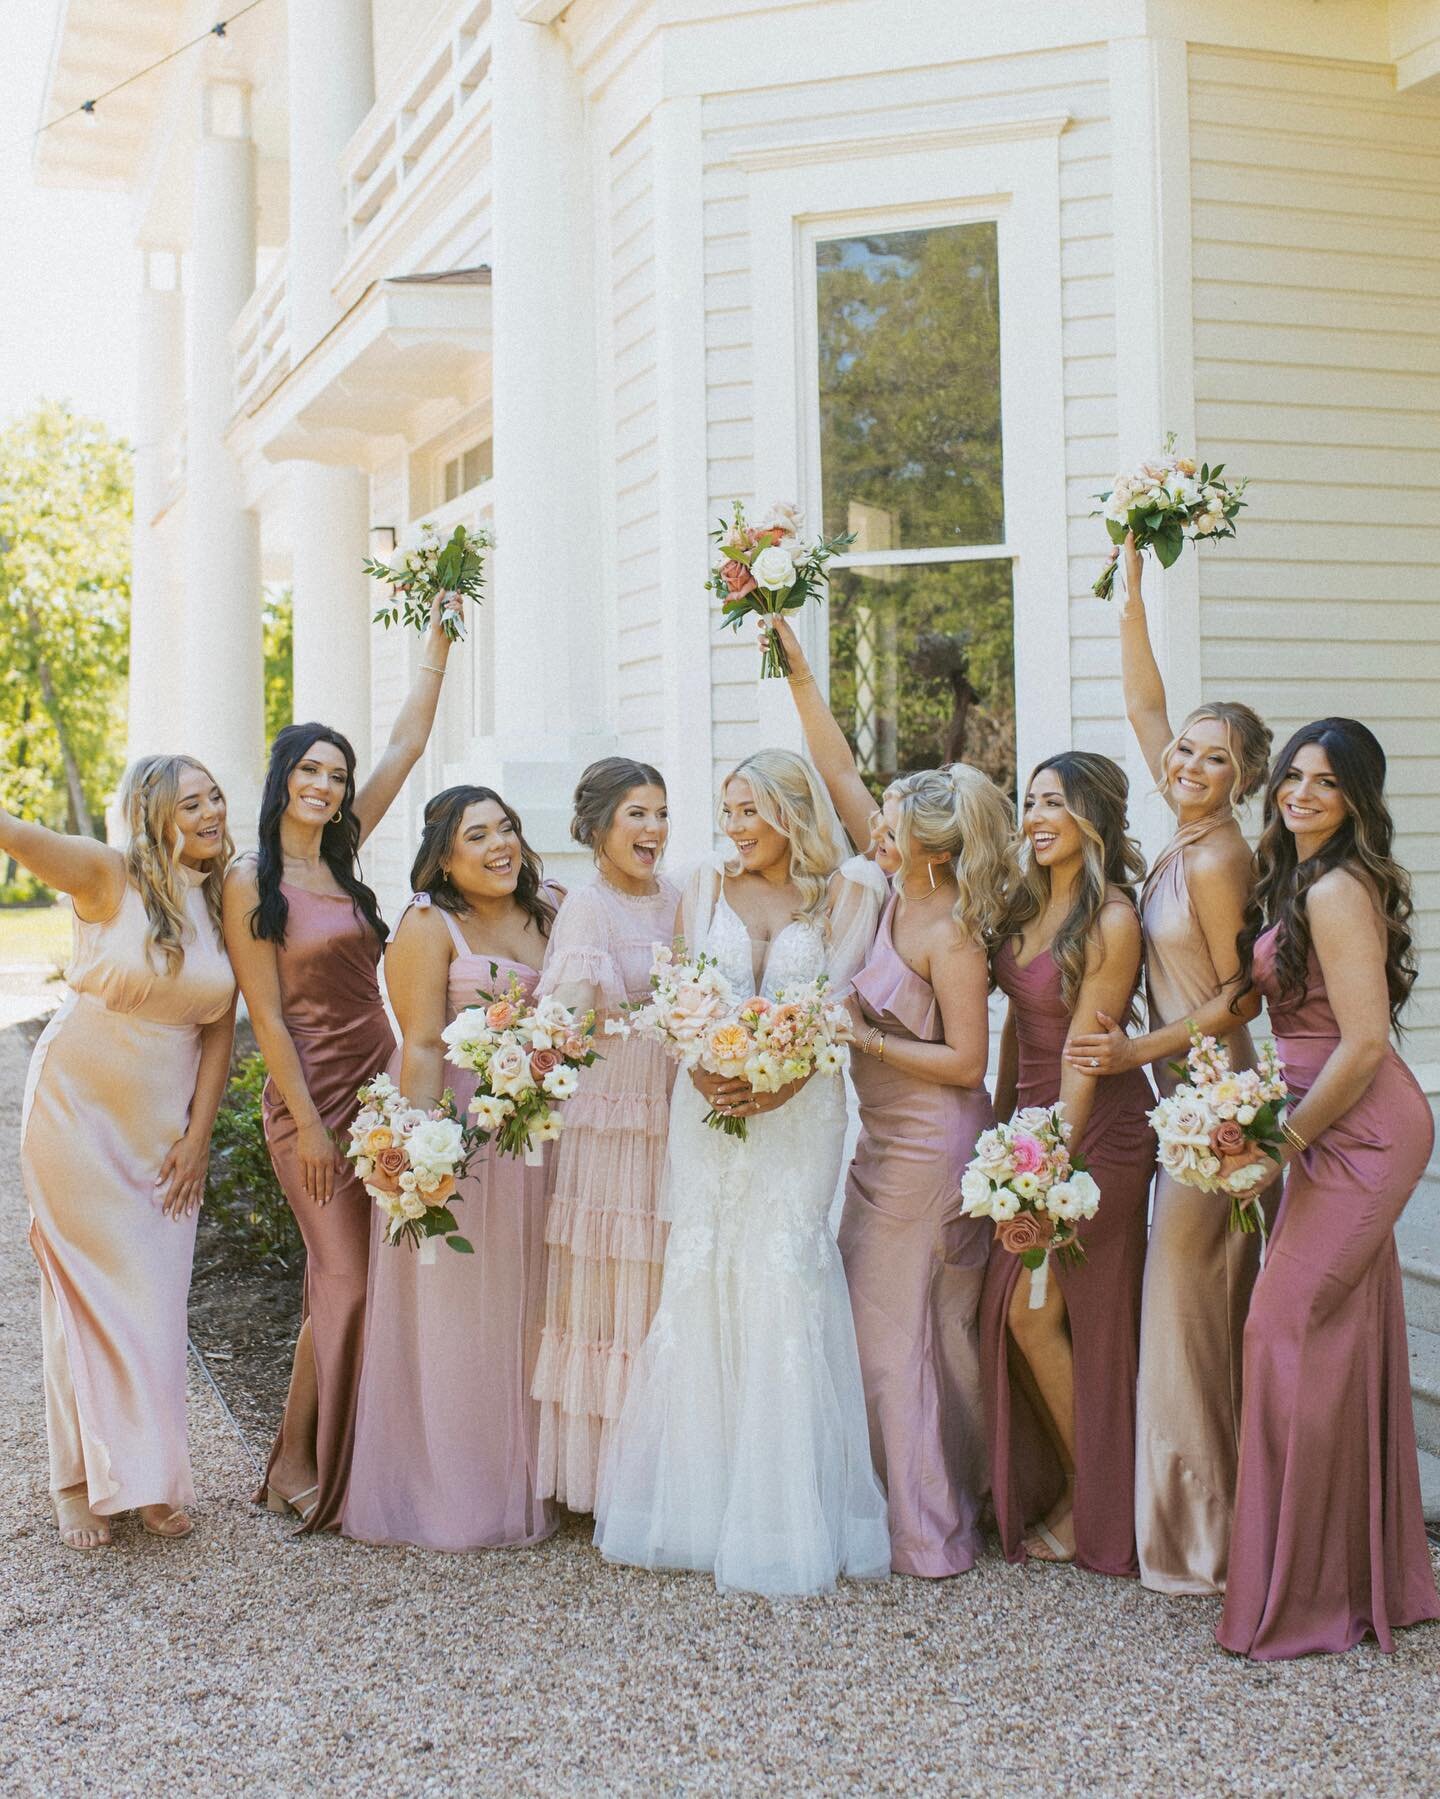 The girlssss🤍

I&rsquo;m so overwhelmed with EXCITEMENT!!! These past few weeks I have been handed some of the most gorgeous weddings and am so excited to share them all✨